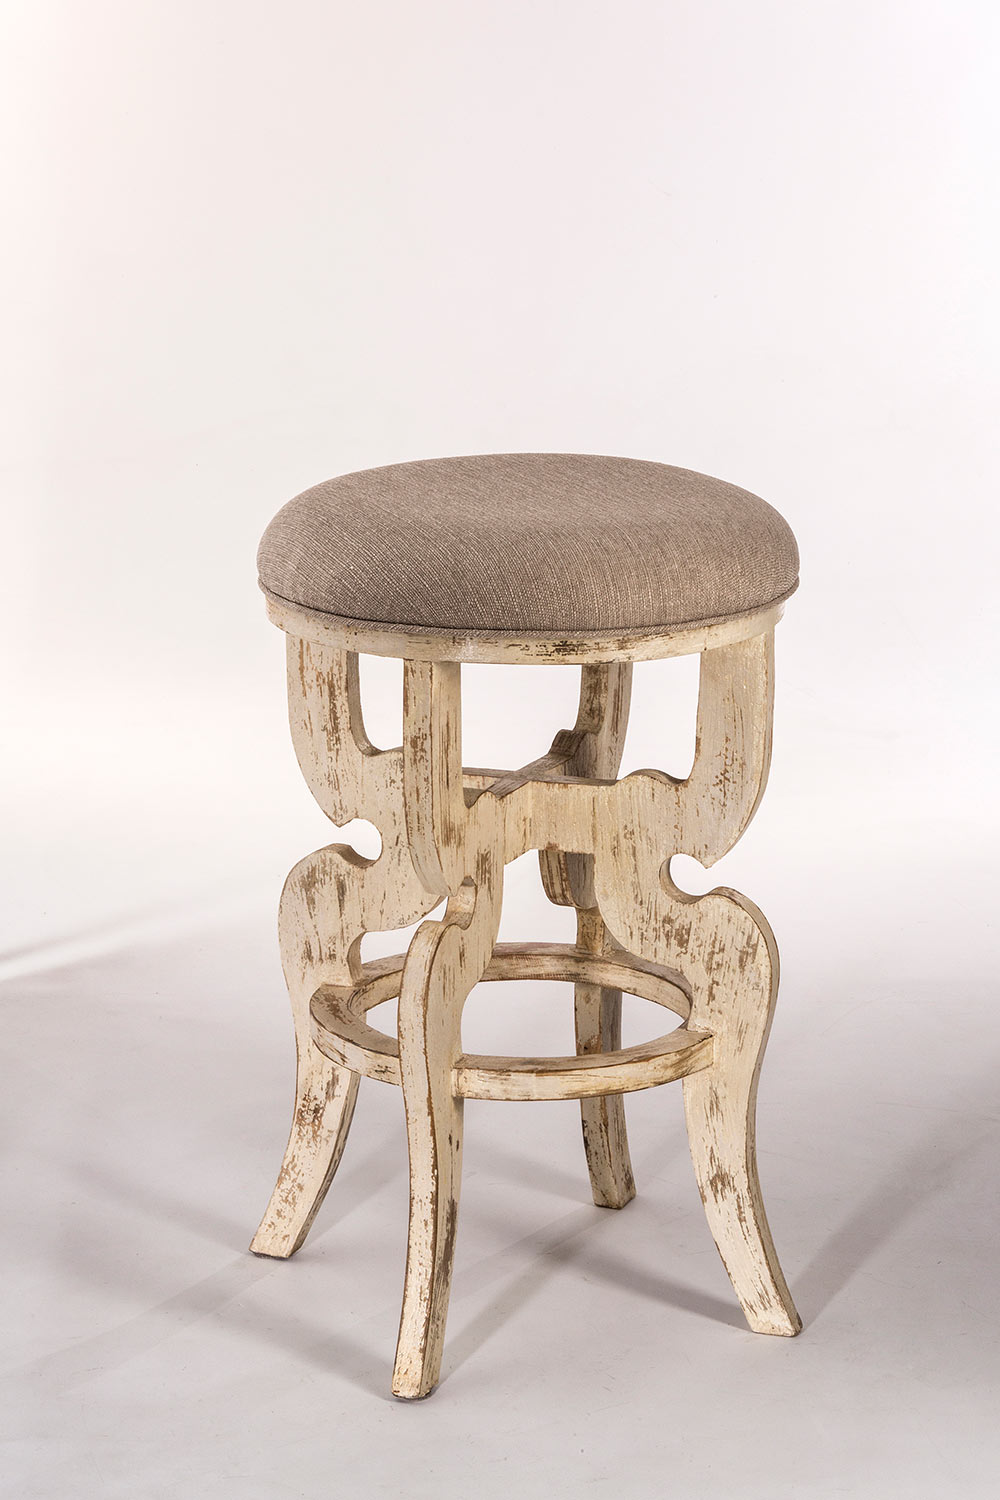 Hillsdale Medlock Backless Counter Stool - Whitewash - Woven Beige Fabric